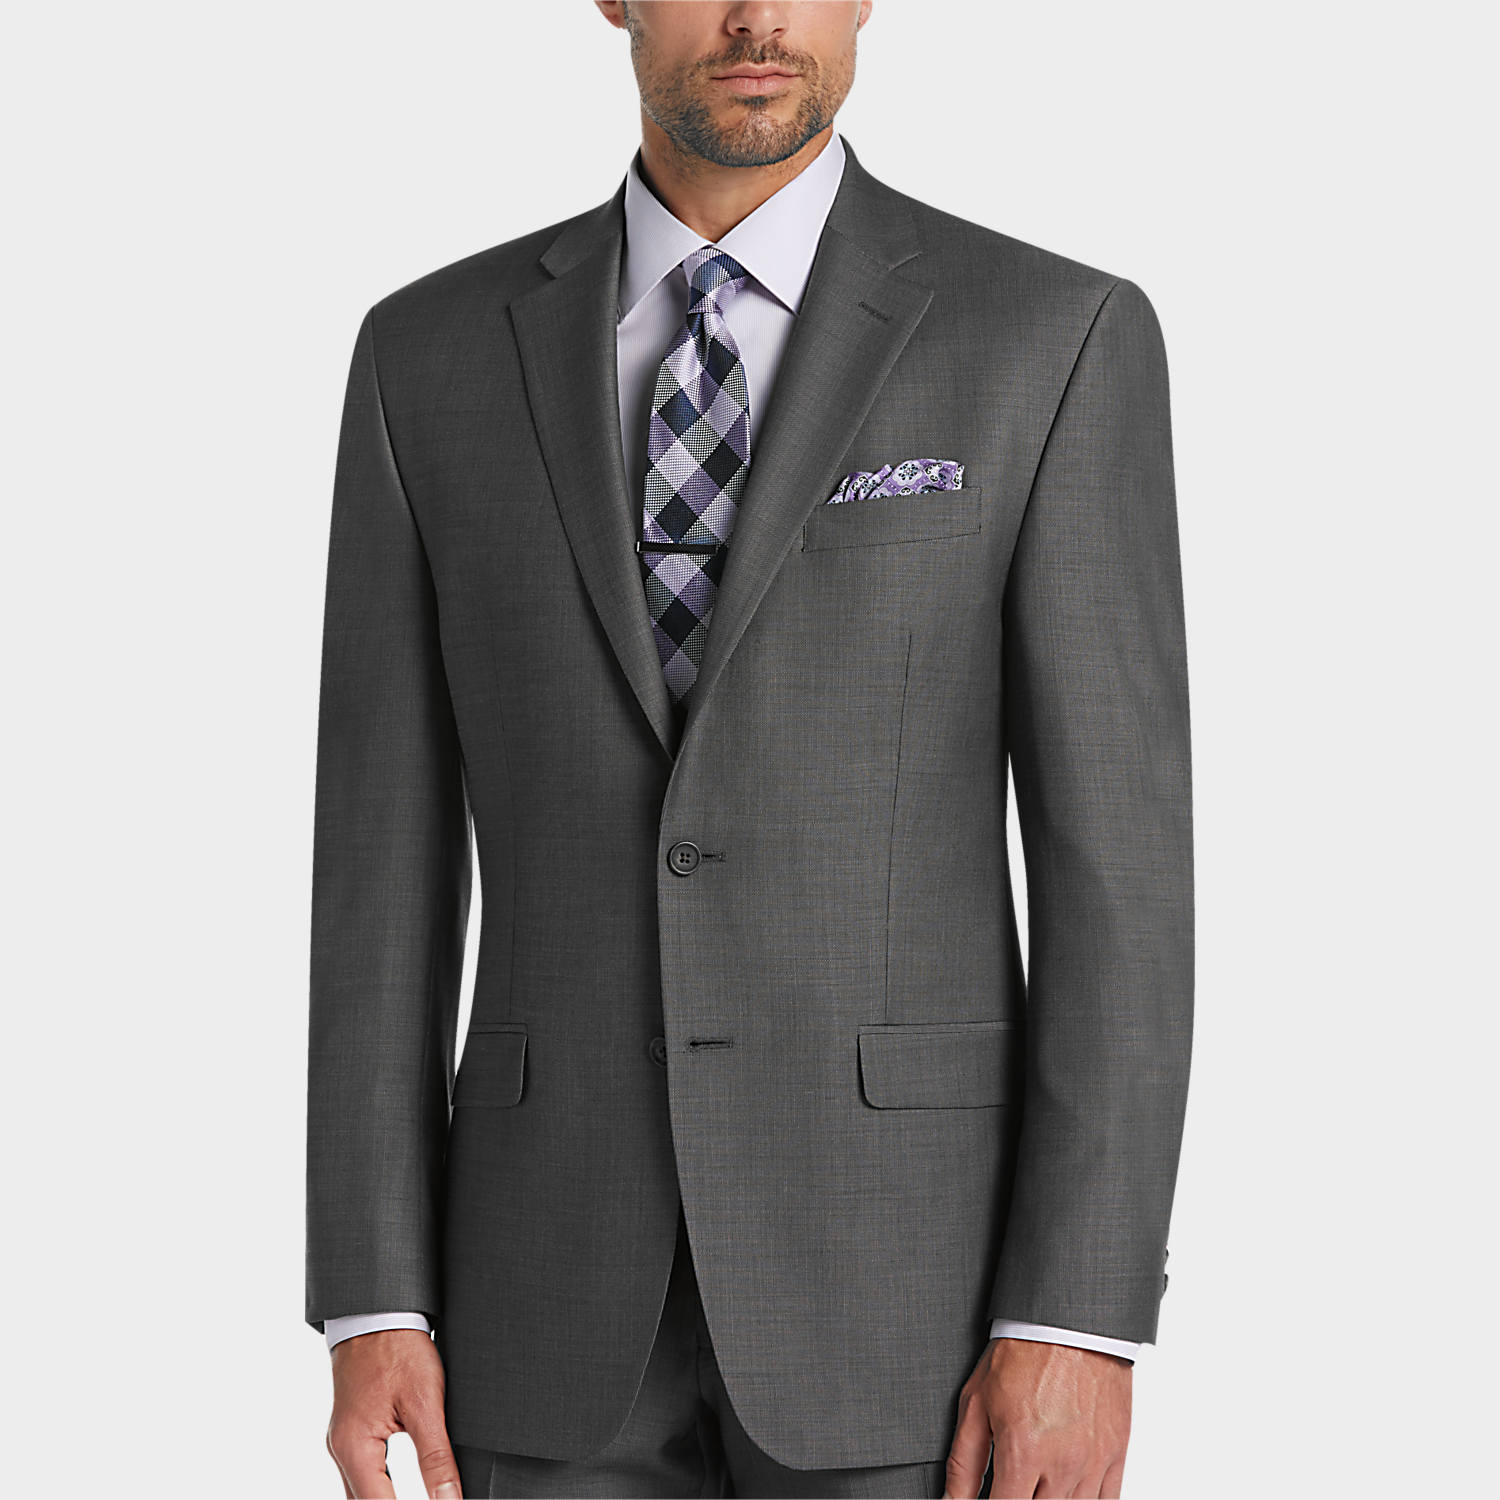 Men's Wearhouse Clearance Suits